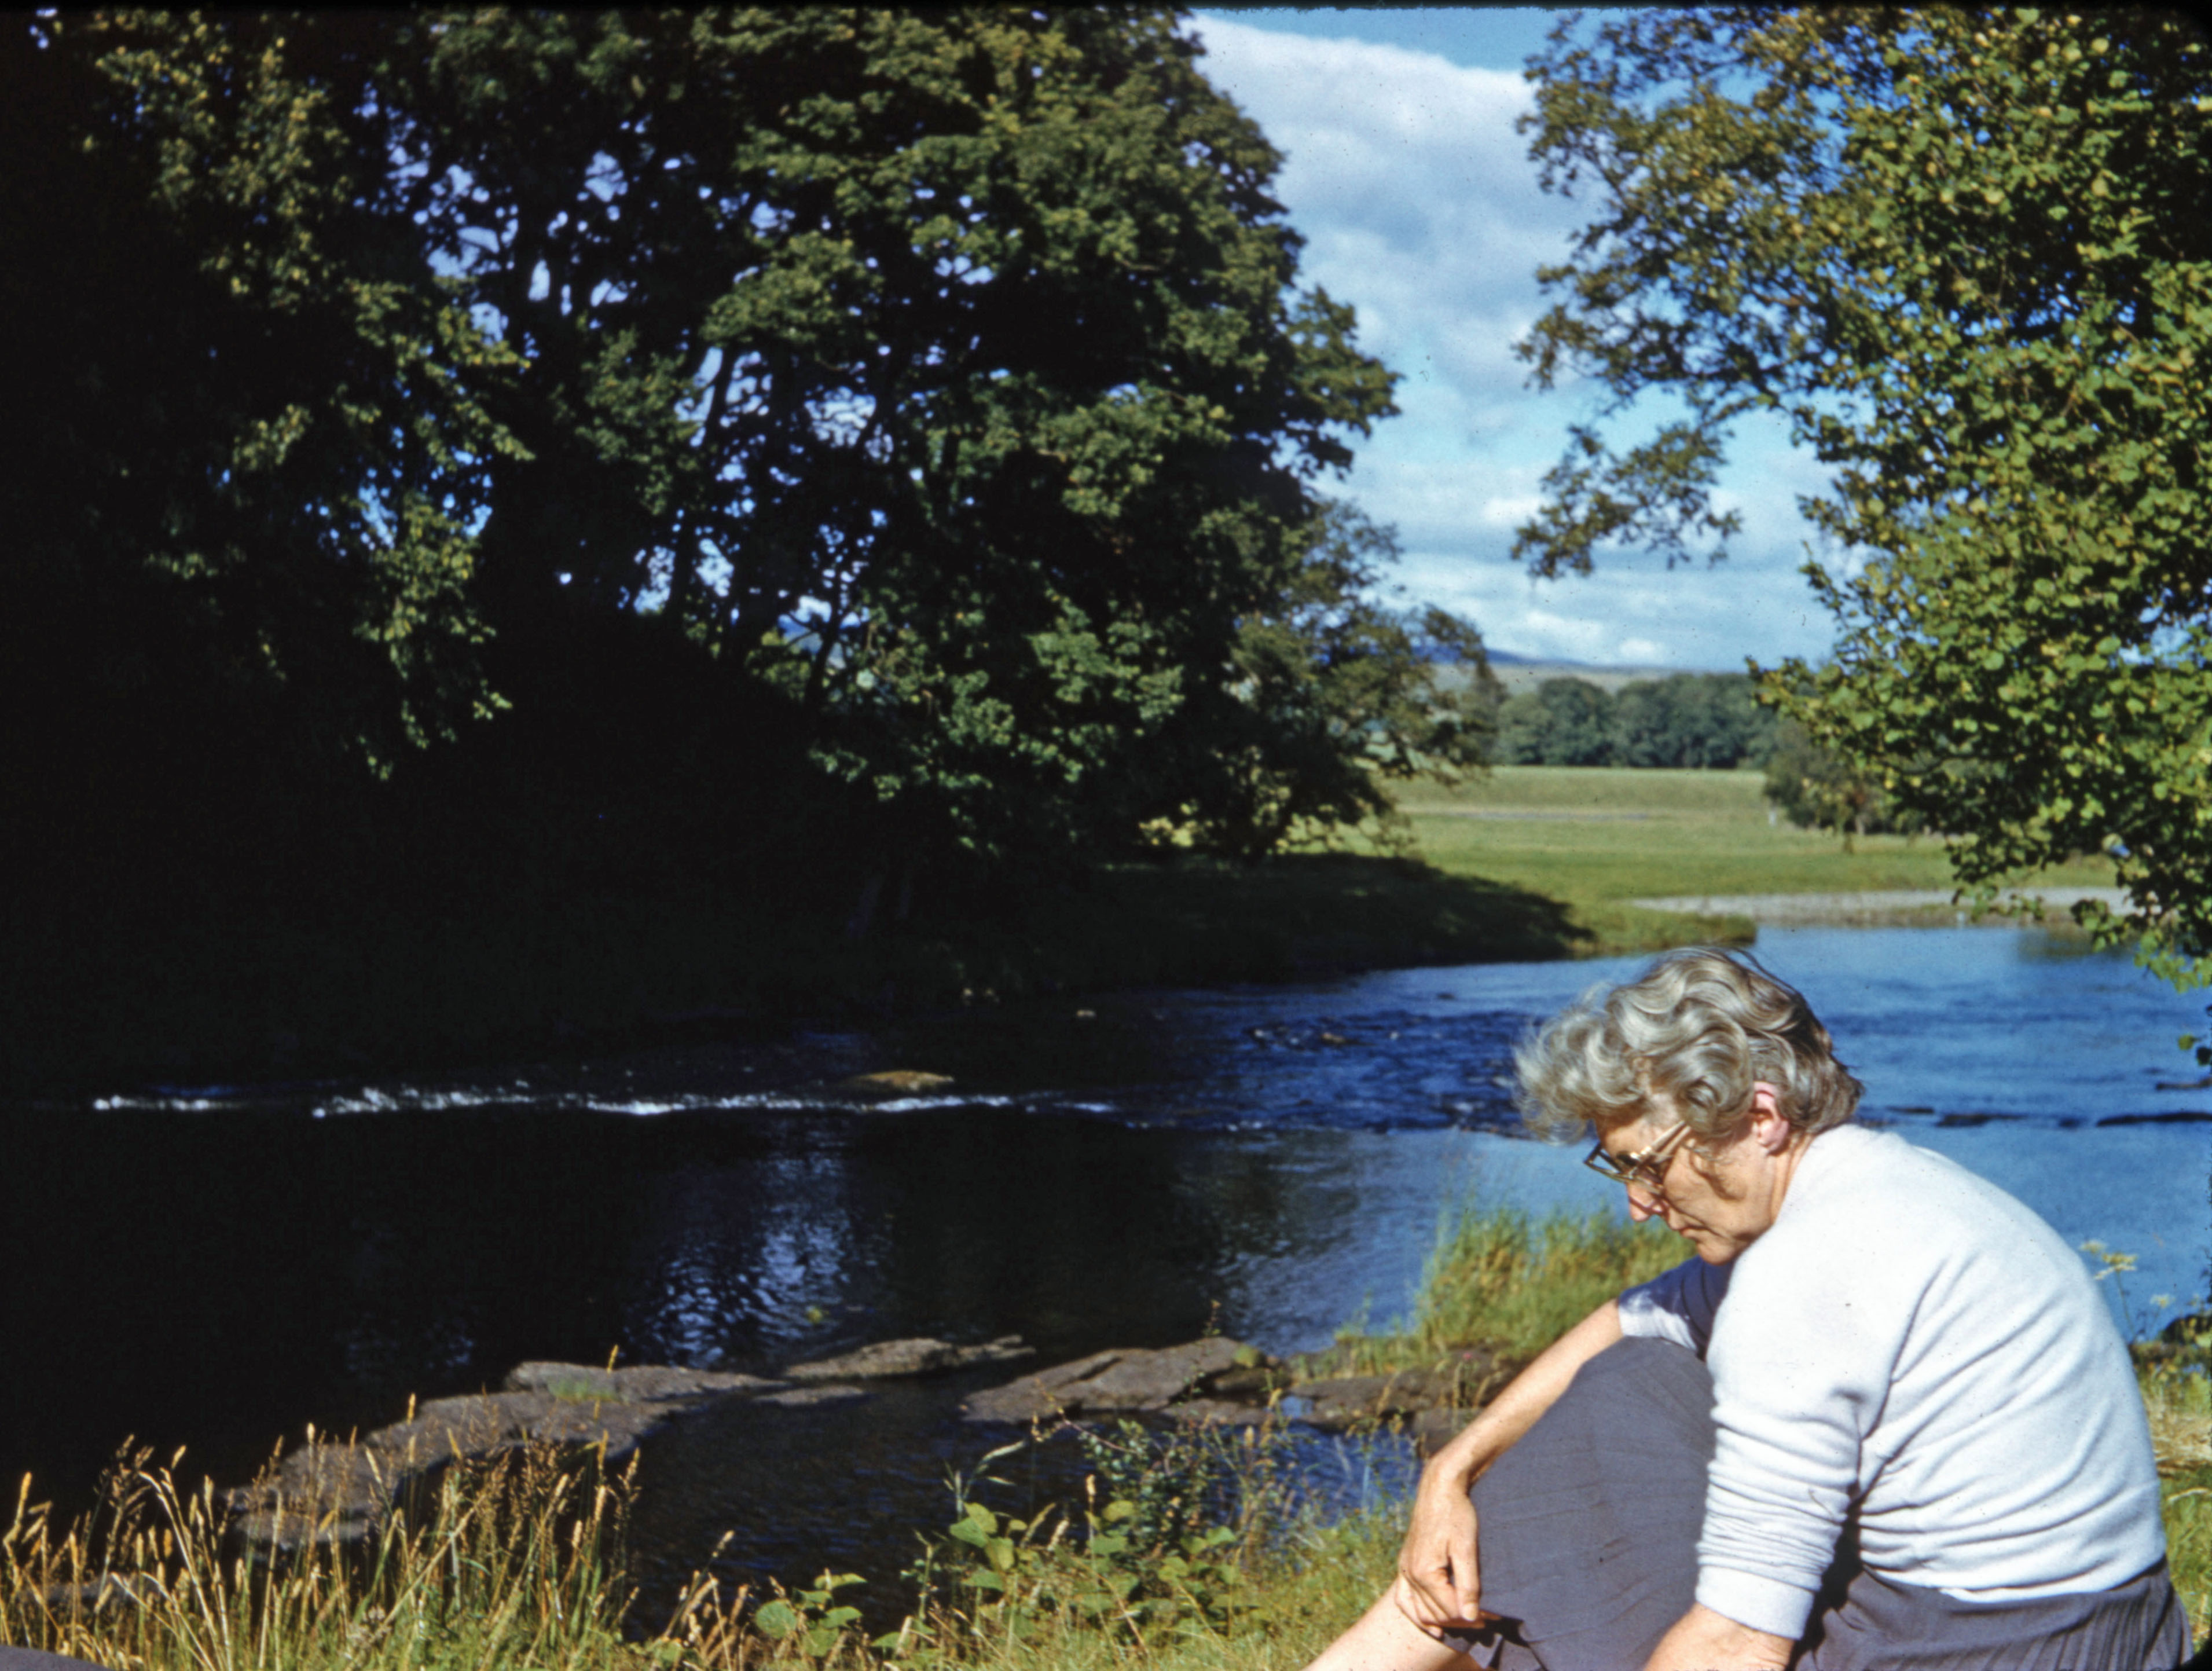 August 1959 Joan on the banks of the river Teith in southern Scotland